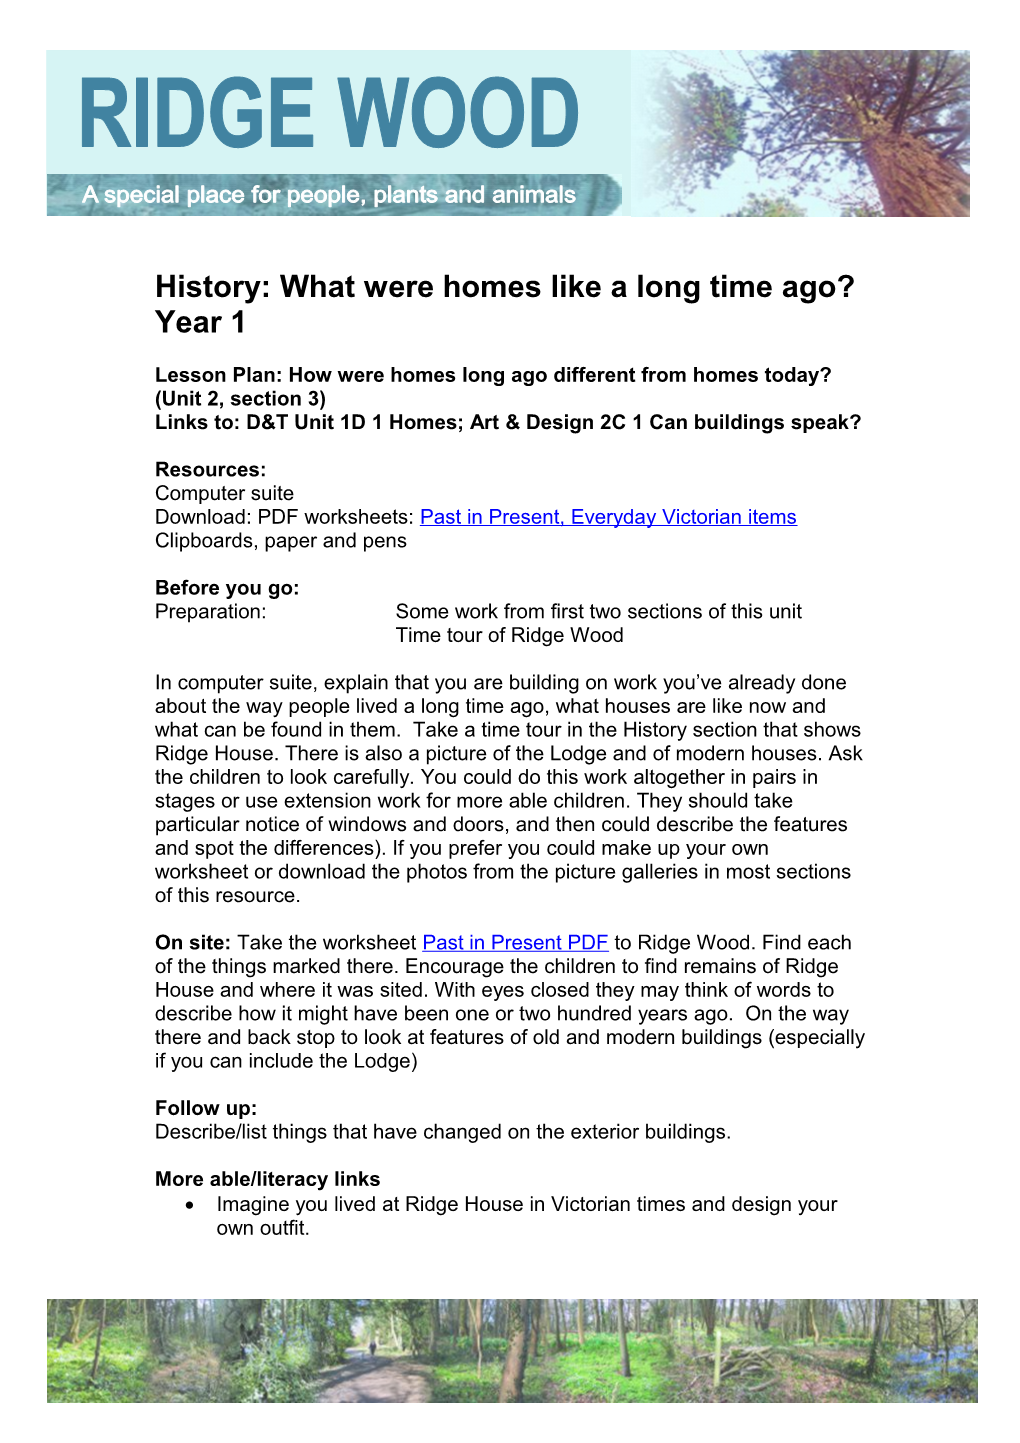 History: What Were Homes Like a Long Time Ago?